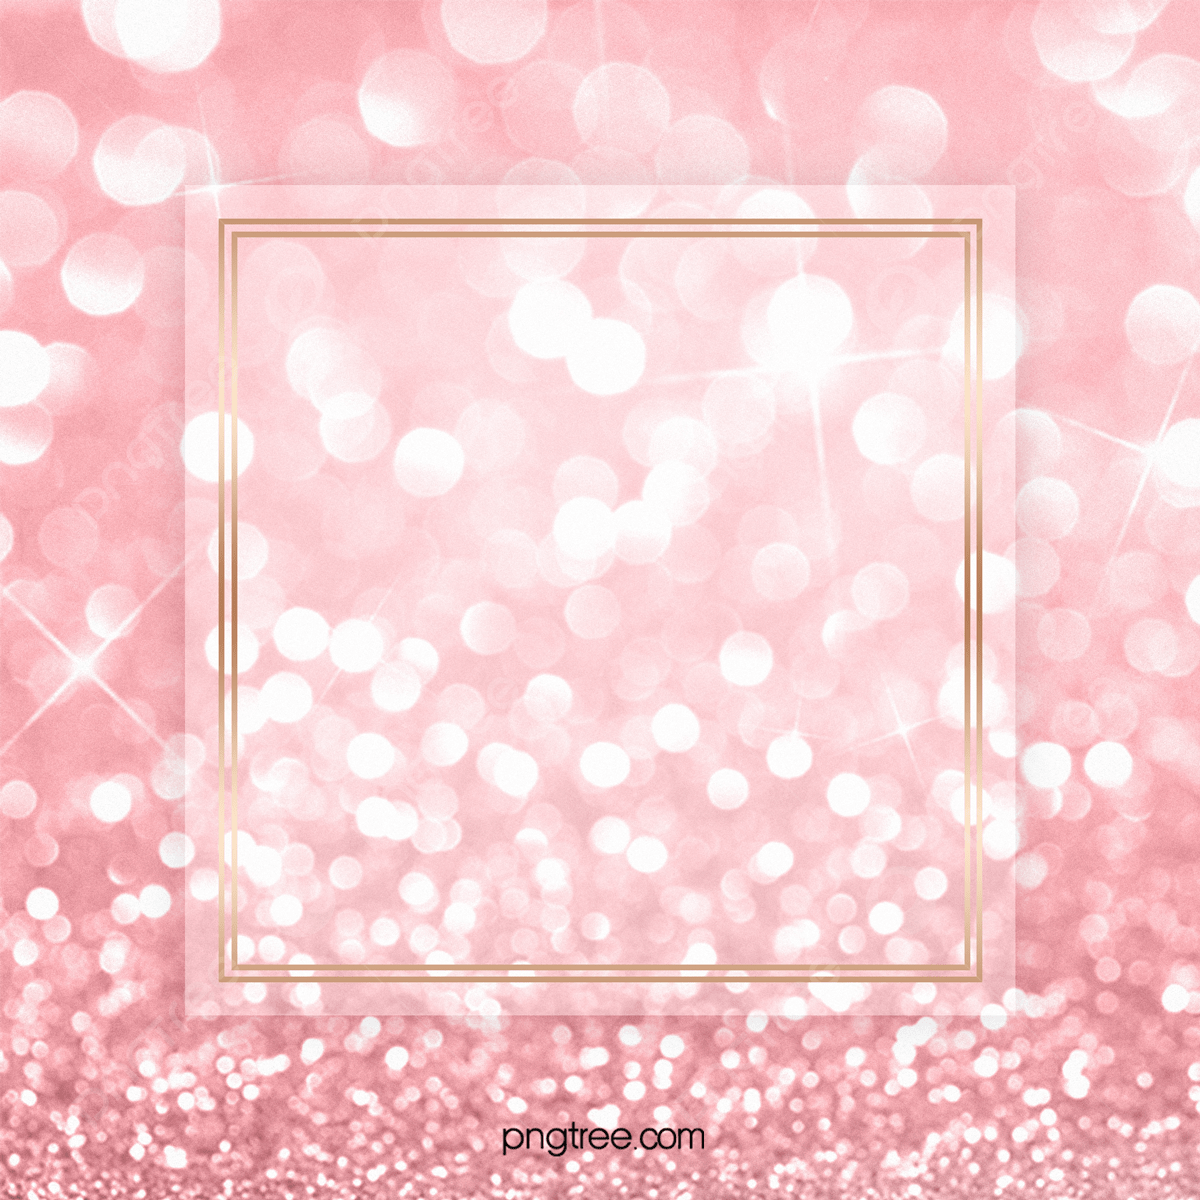 Rose gold square frame on a pink glitter background - Bright, border